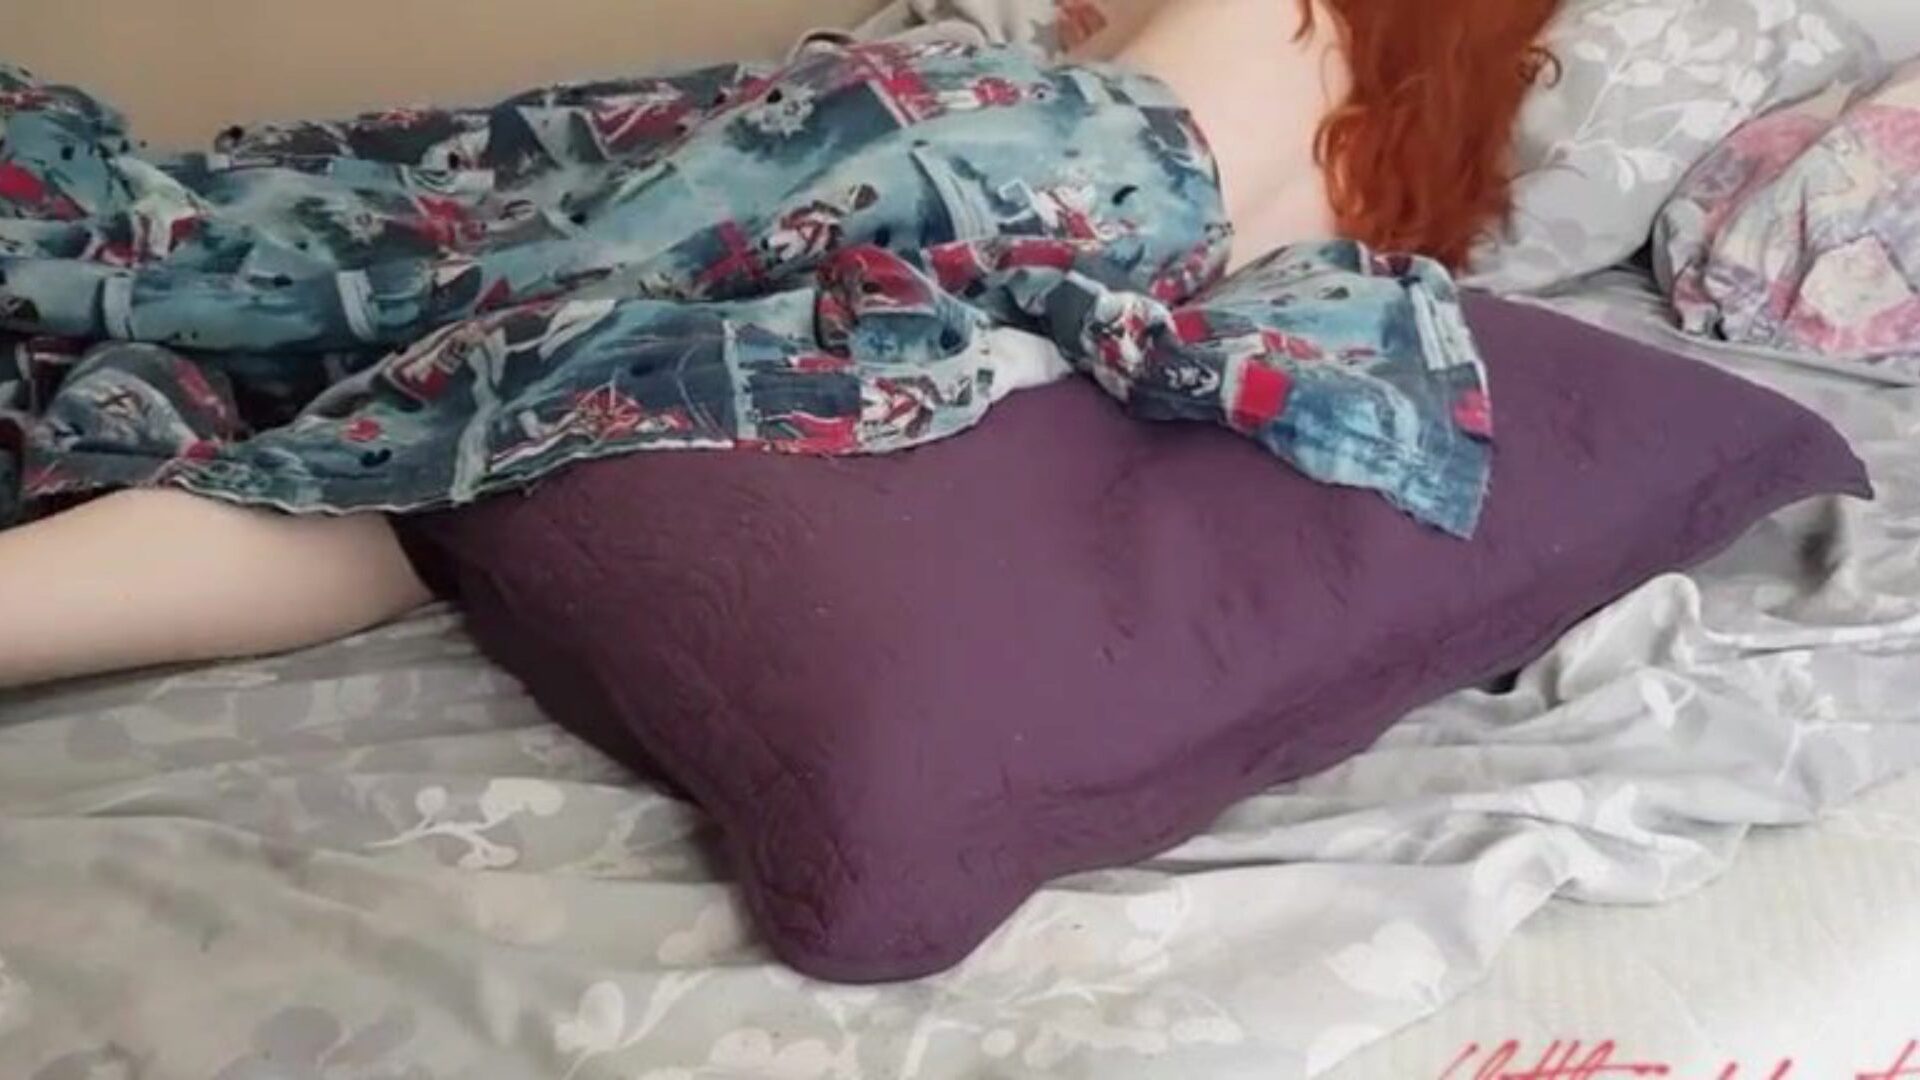 REDHEAD WAKES UP AND SLEEPILY RUBS AGAINST A PILLOW TO AN ASTOUNDING BIG O!!